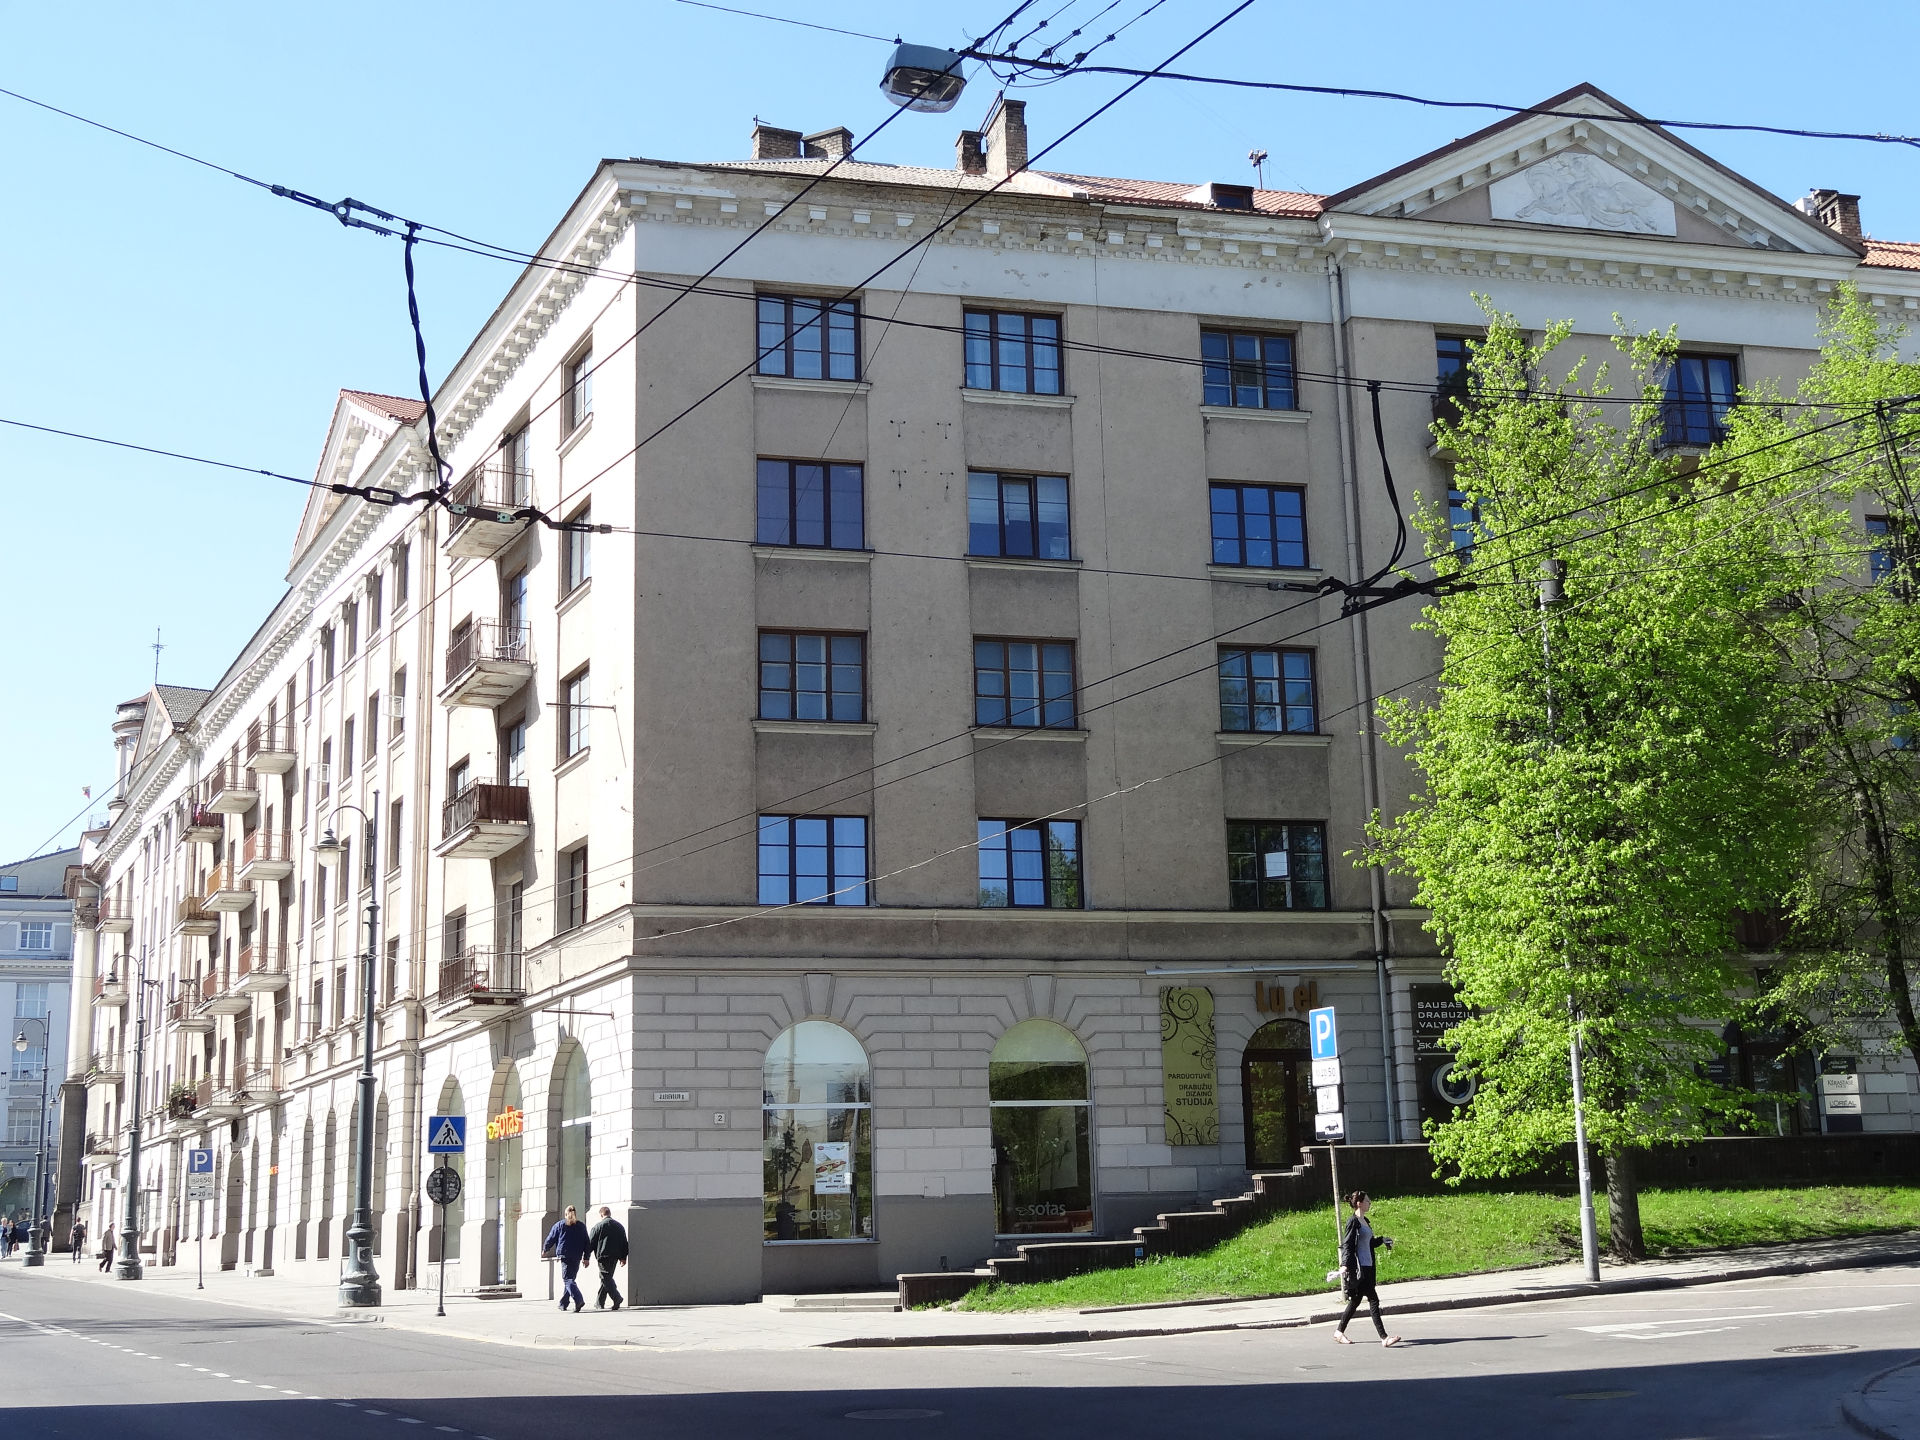 Building of the Society of Friends of Learning in the interwar period of the 20th century